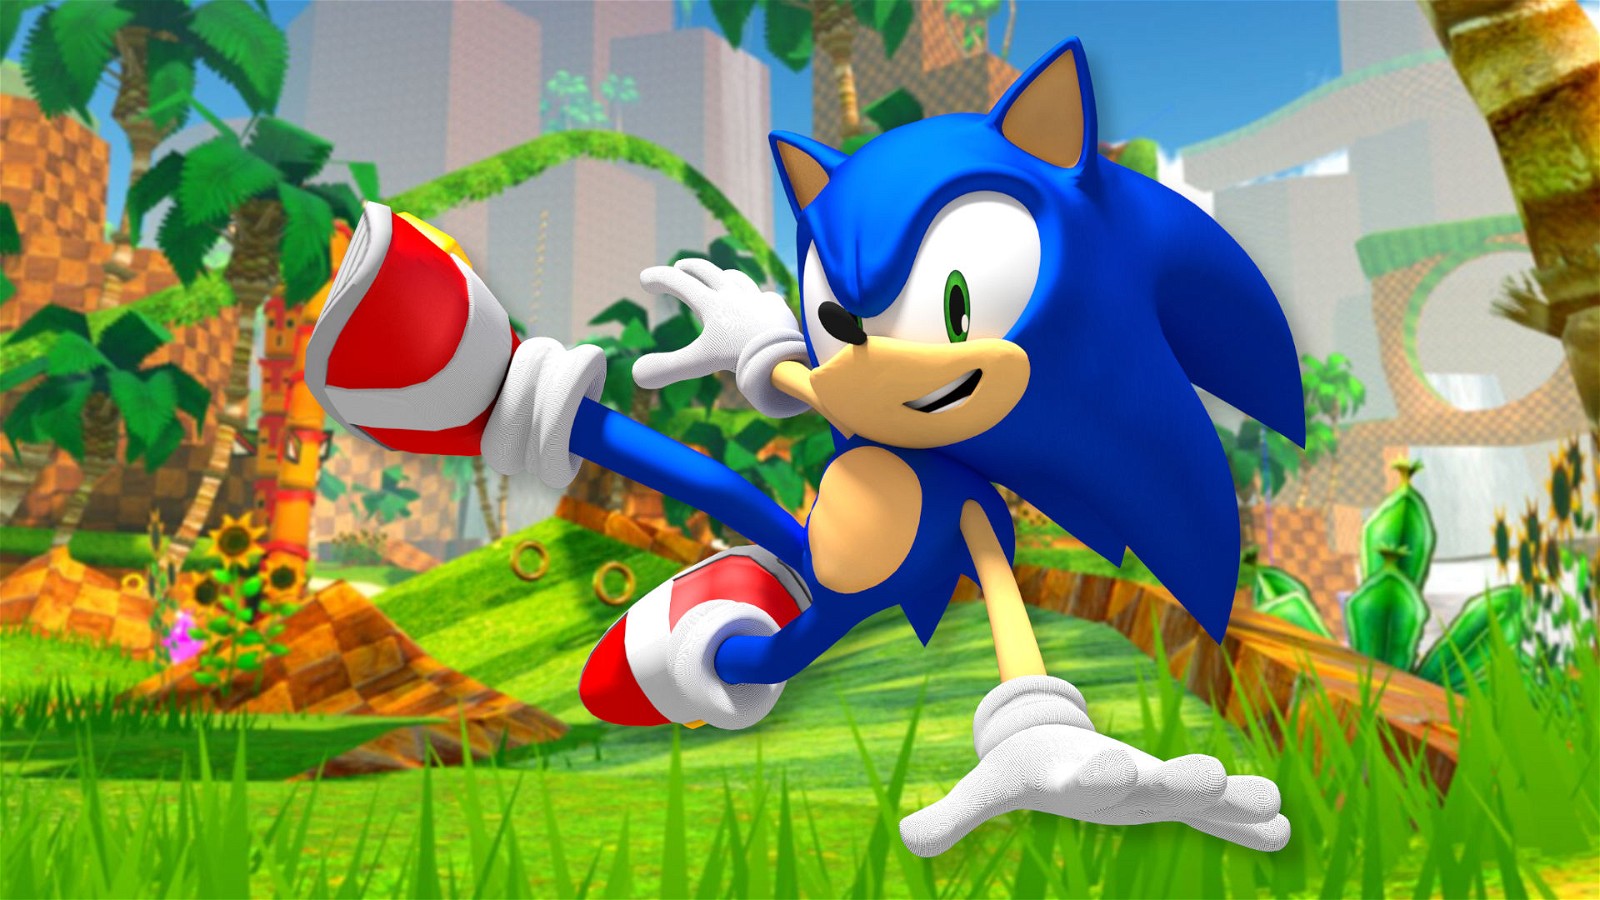 SEGA Launches Fast. Friends. Forever. Campaign to Celebrate Sonic